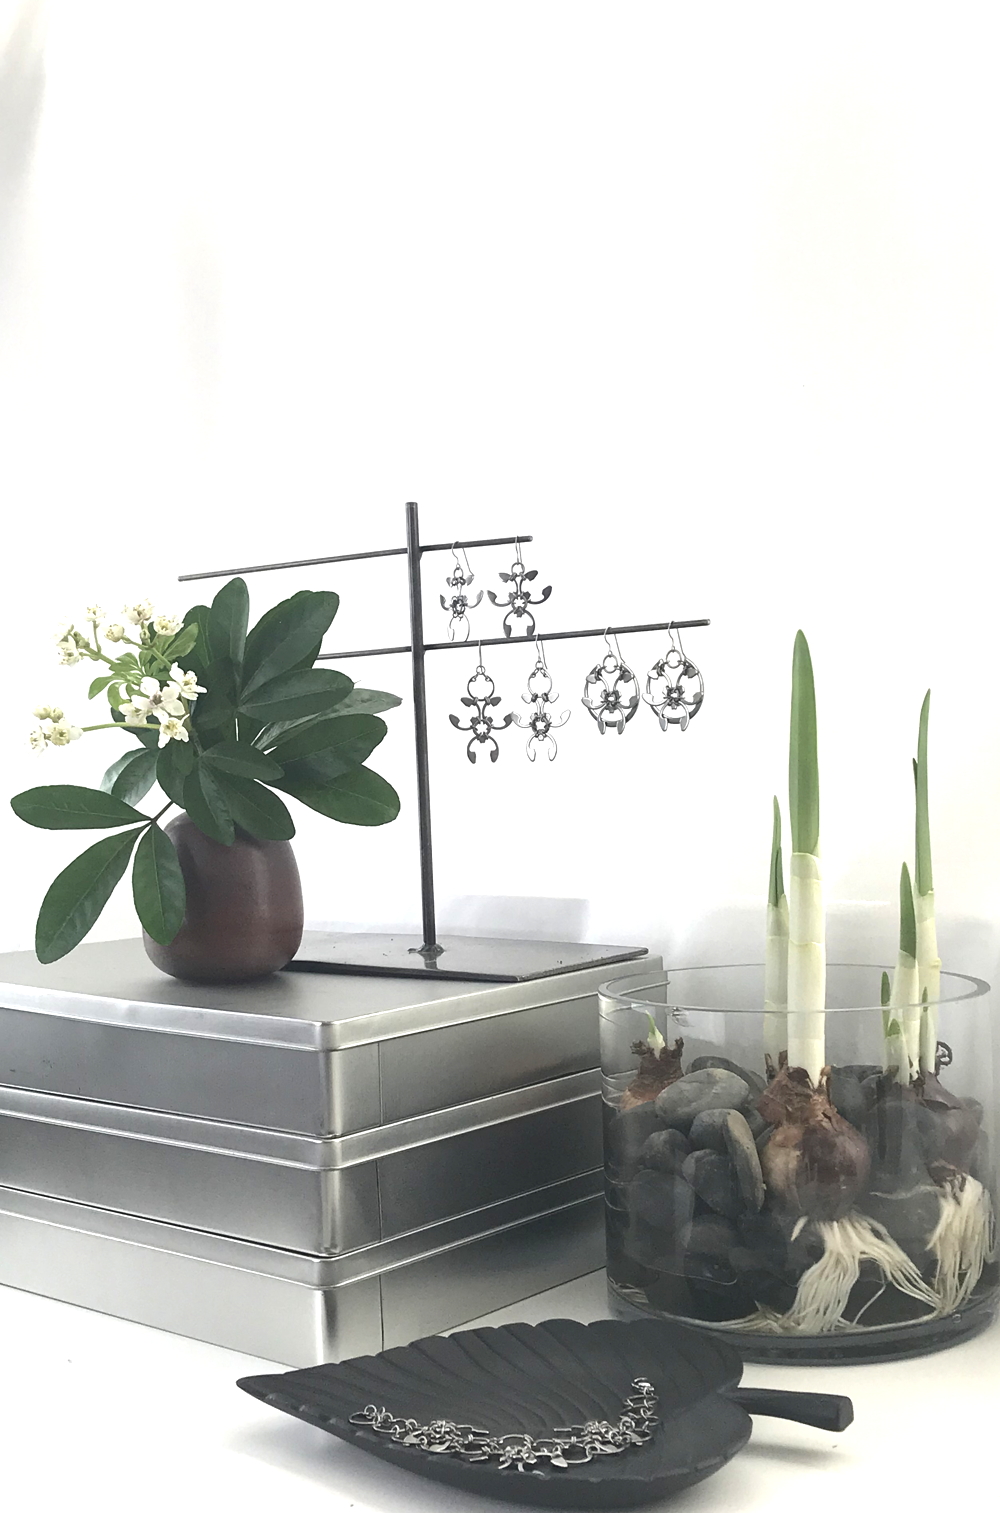 Studio vignette: a brown vase of Choisya ternate (Mexican Orange Blossom) flowers sits on a stack of silver-colored metal paper boxes next to a glass cylindrical vase of gray rocks and paperwhite bulbs (narcissus forced in water and stones), with Wraptillion's spiky abstract botanical statement Trellis Earrings, Garland Earrings, and Rose Window Earrings dangling from a jewelry stand nearby, and a black leaf-shaped dish holding the Garland Bracelet.